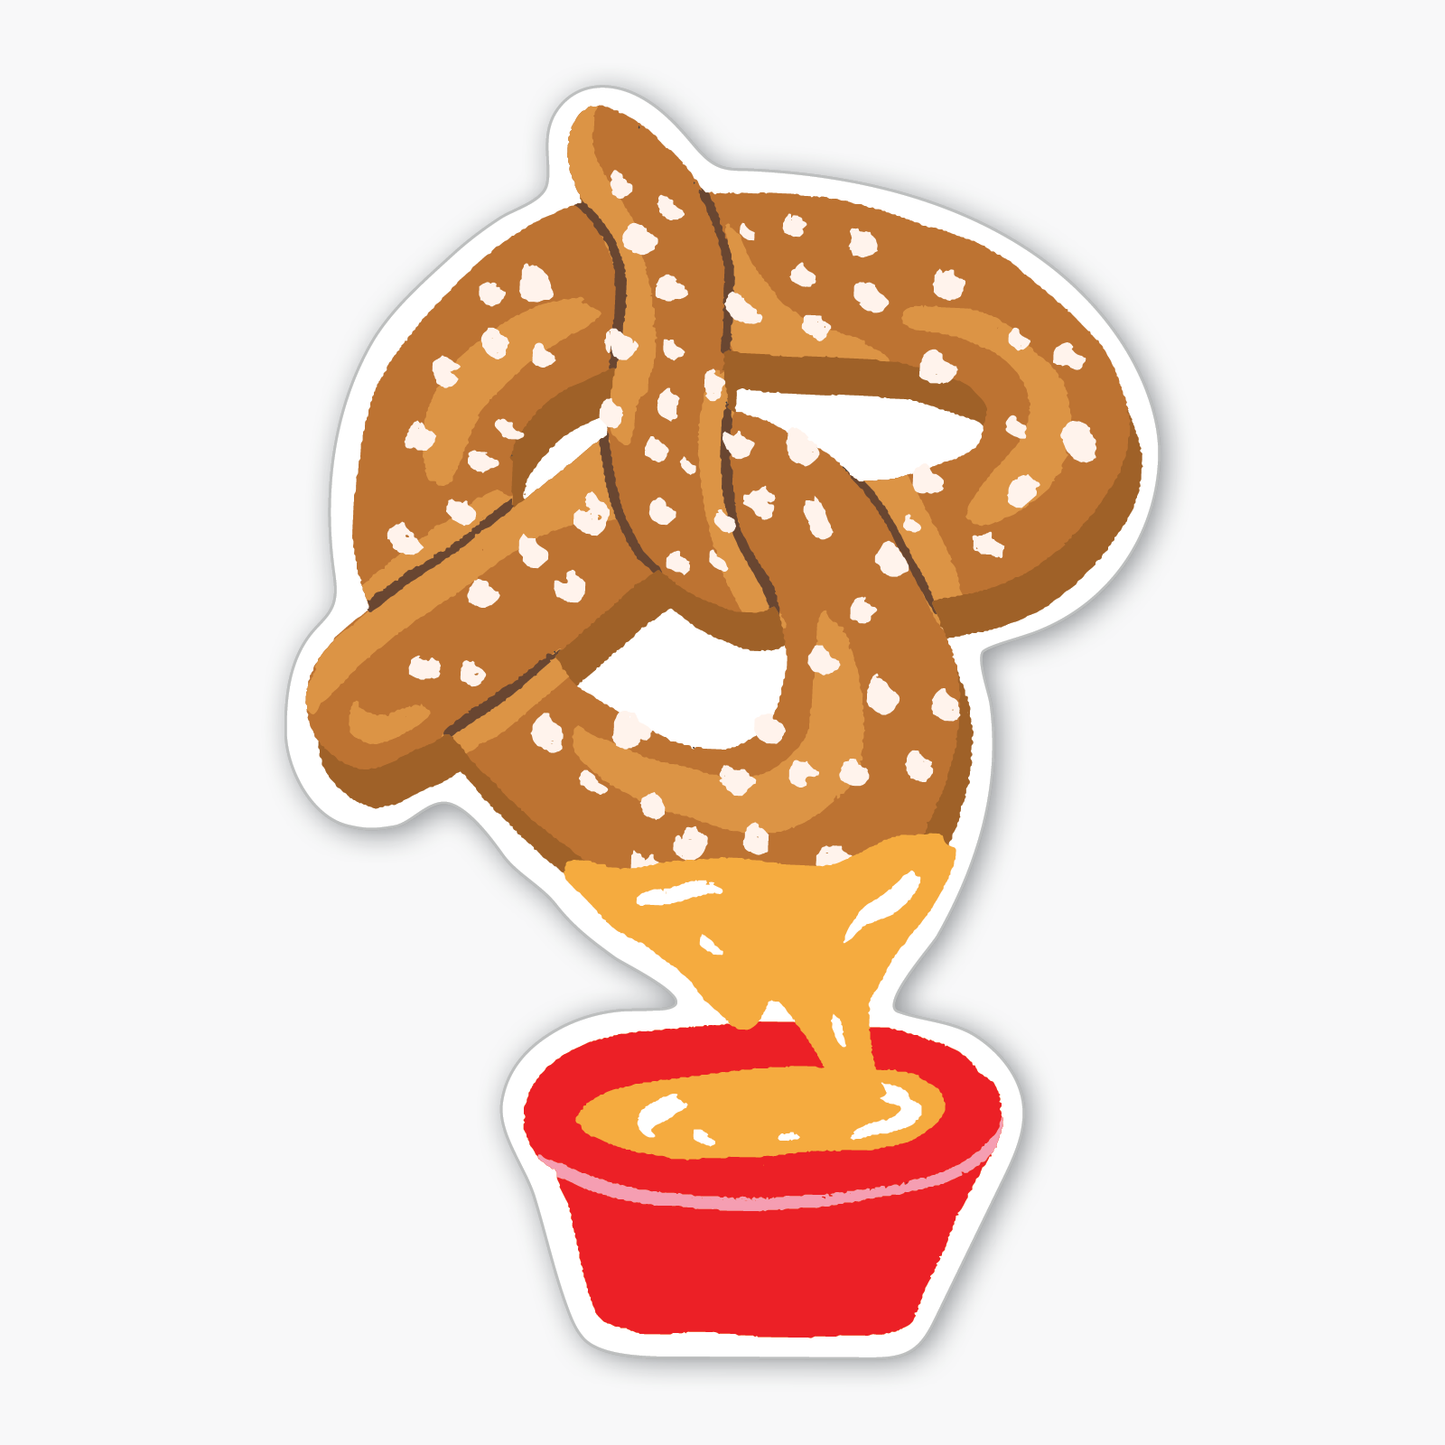 Sticker with an illustration of a salty pretzel with a corner dipped into a red container of gooey orange cheese.